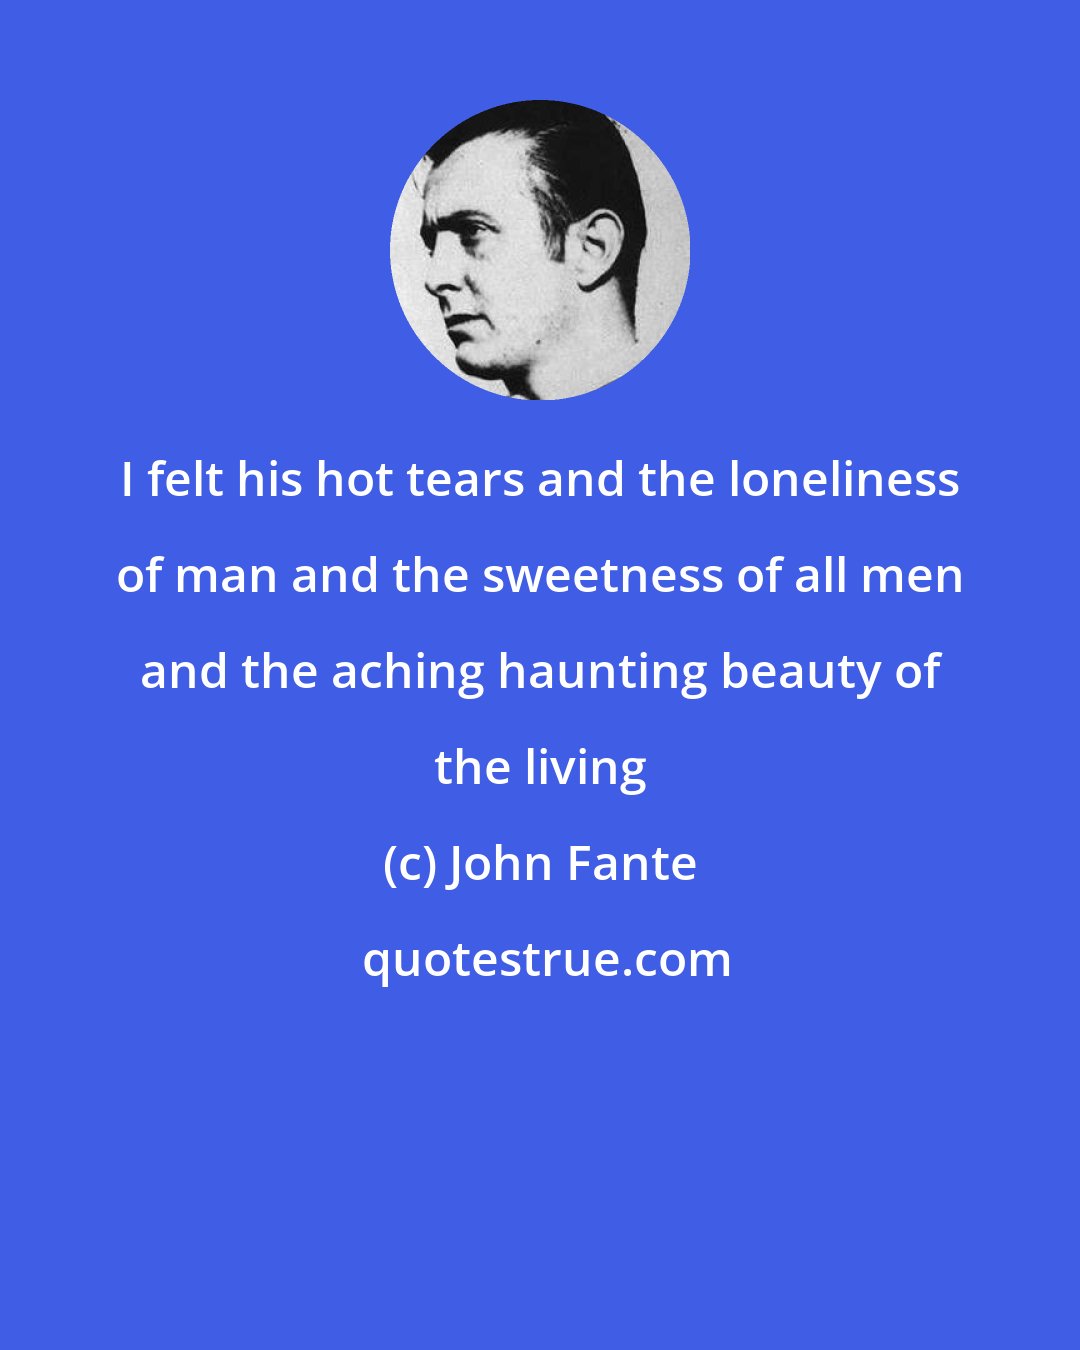 John Fante: I felt his hot tears and the loneliness of man and the sweetness of all men and the aching haunting beauty of the living